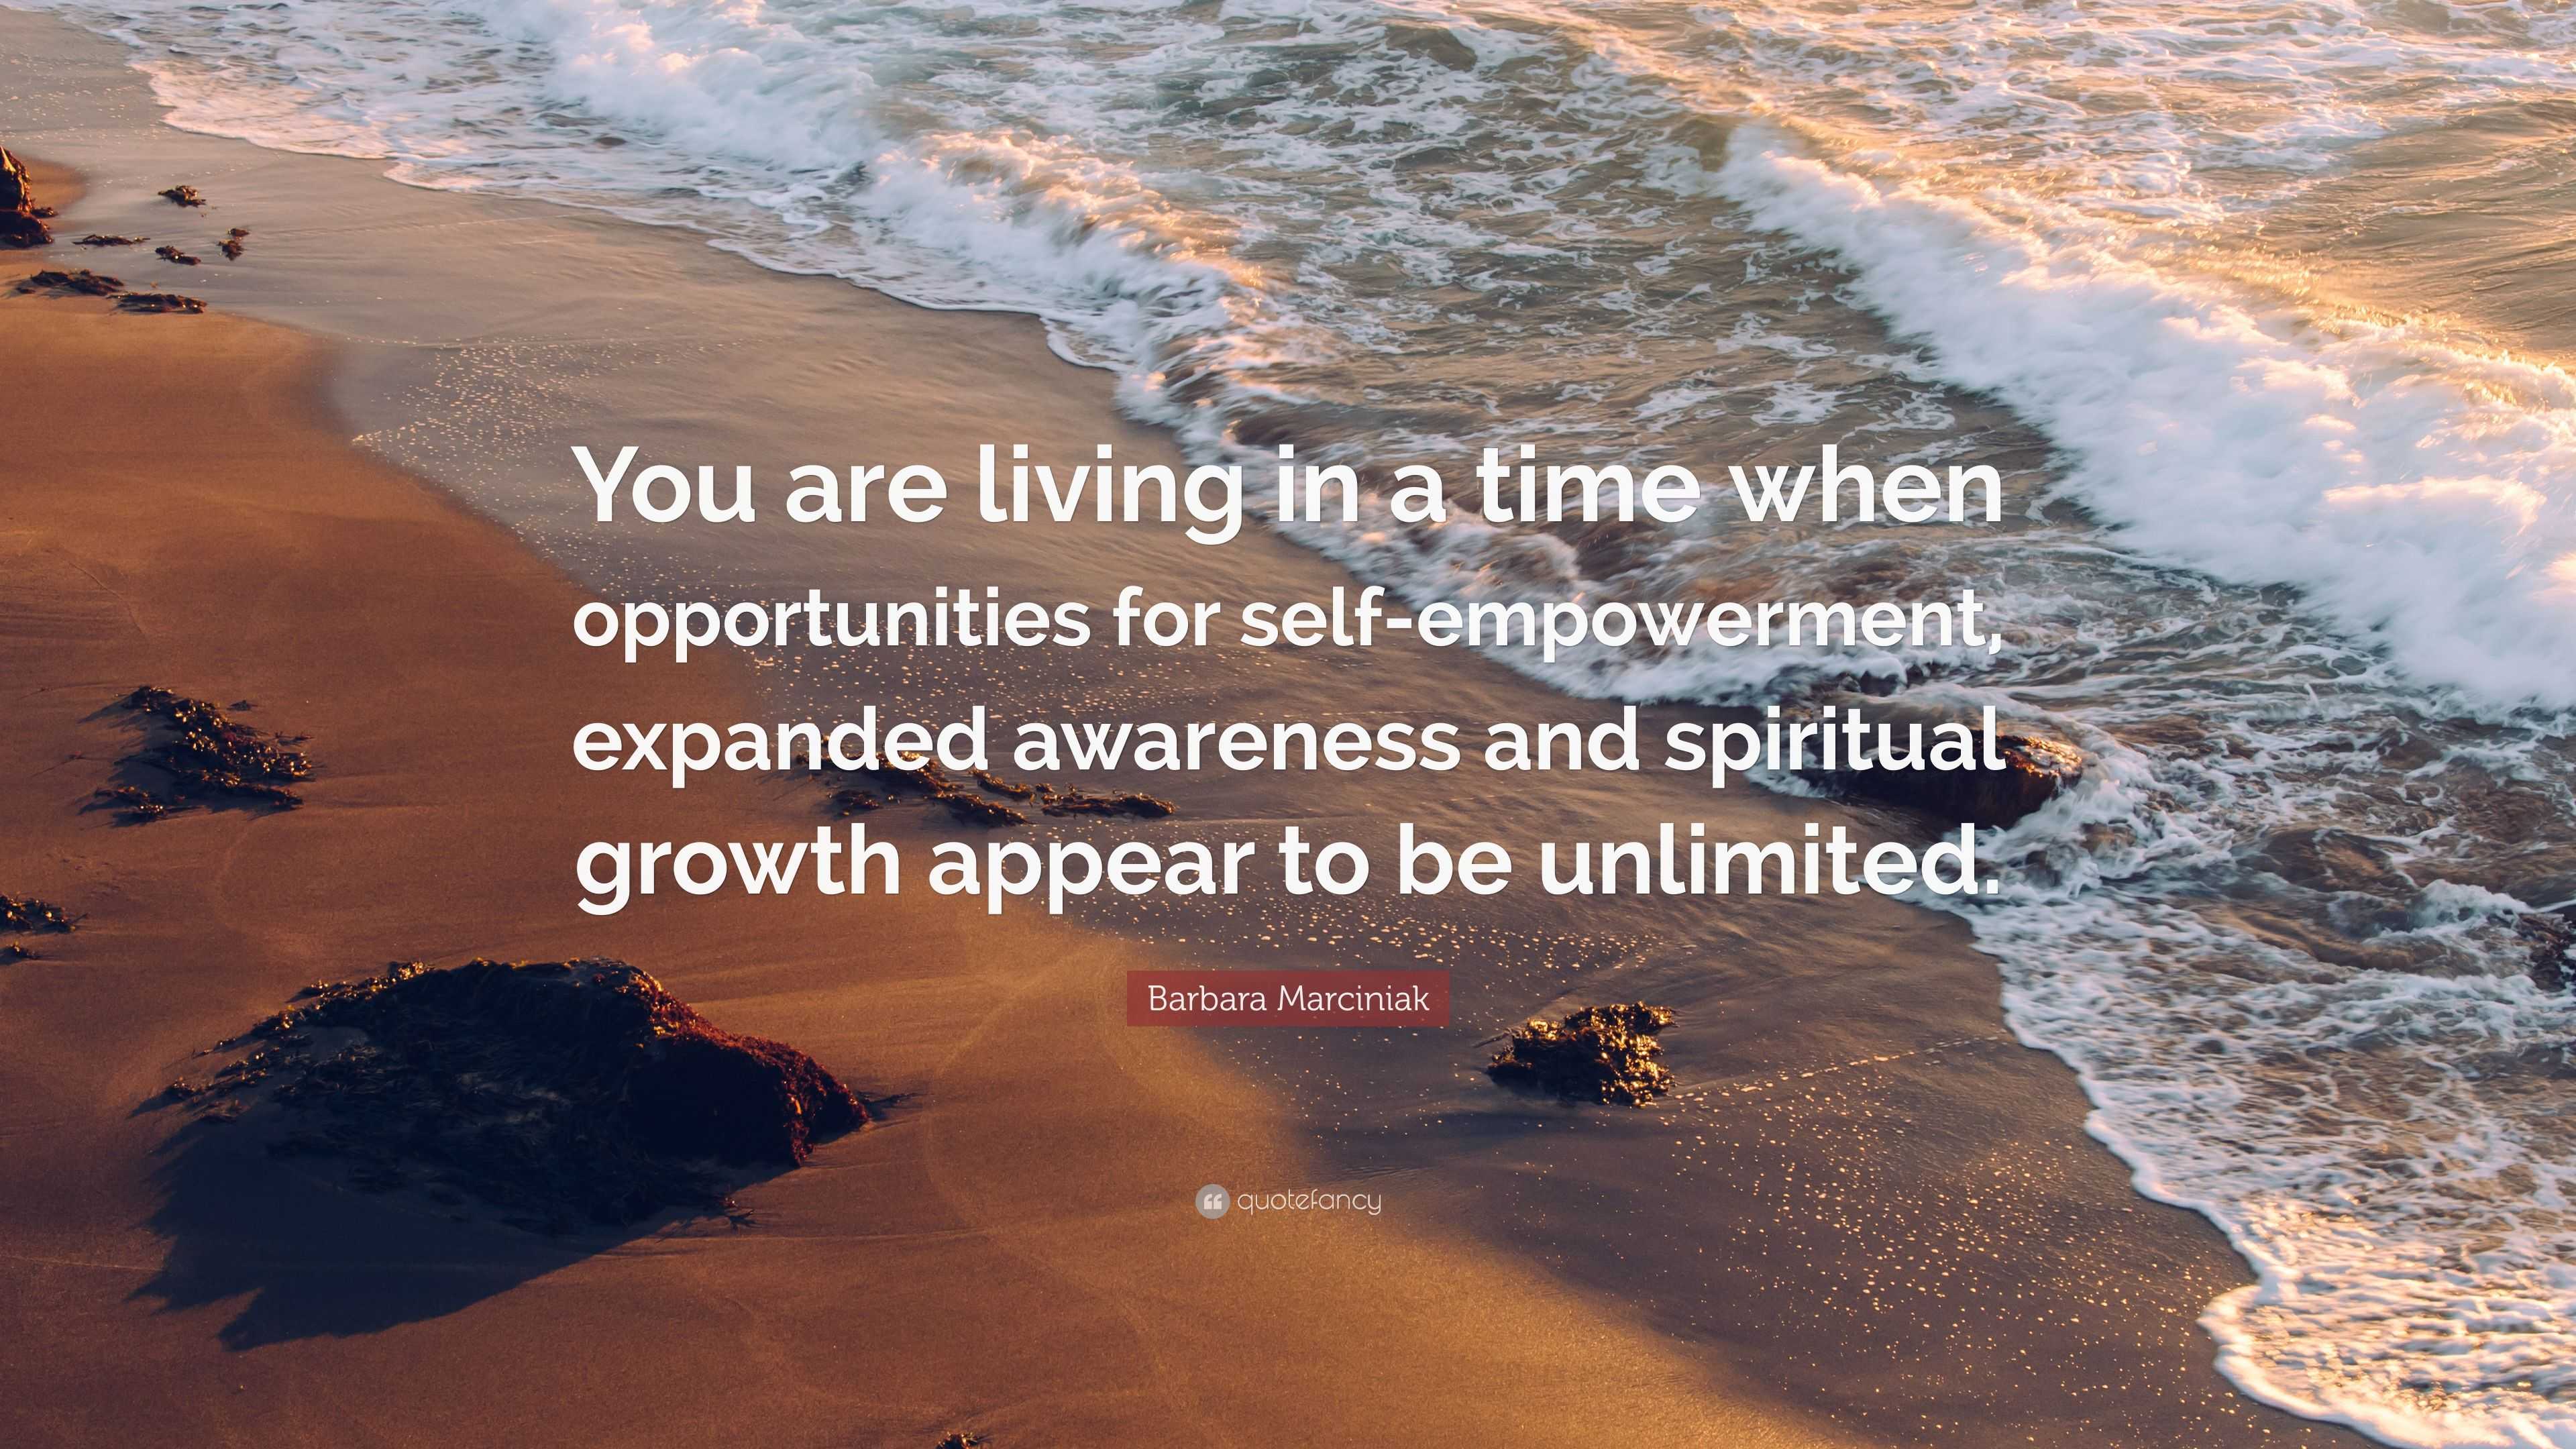 Barbara Marciniak Quote: “You are living in a time when opportunities